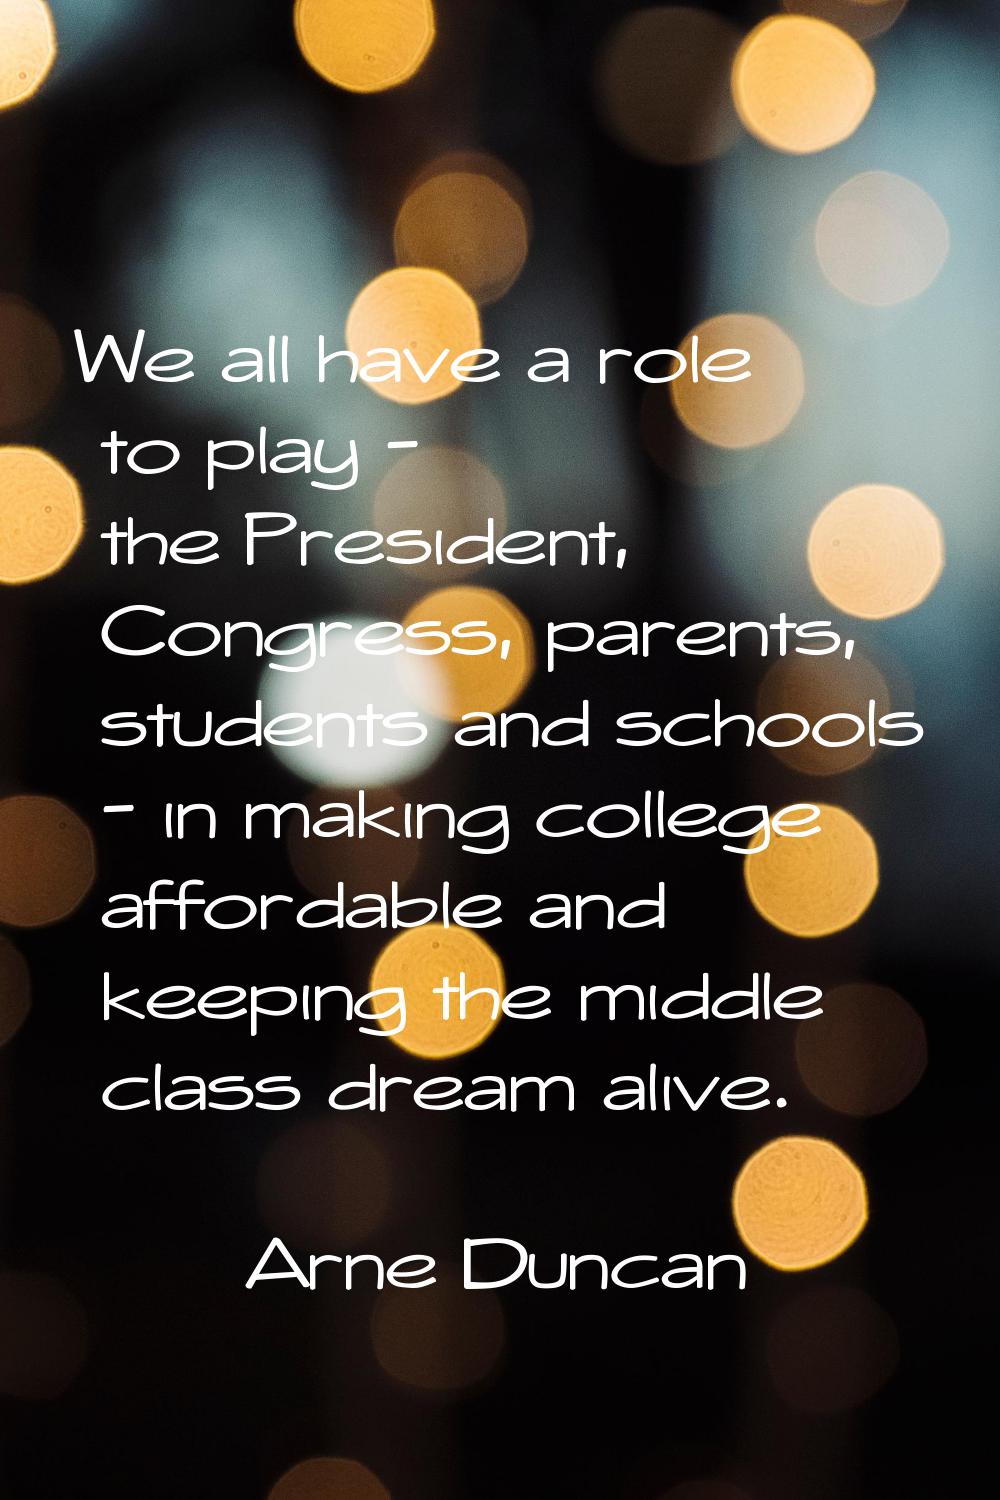 We all have a role to play - the President, Congress, parents, students and schools - in making col